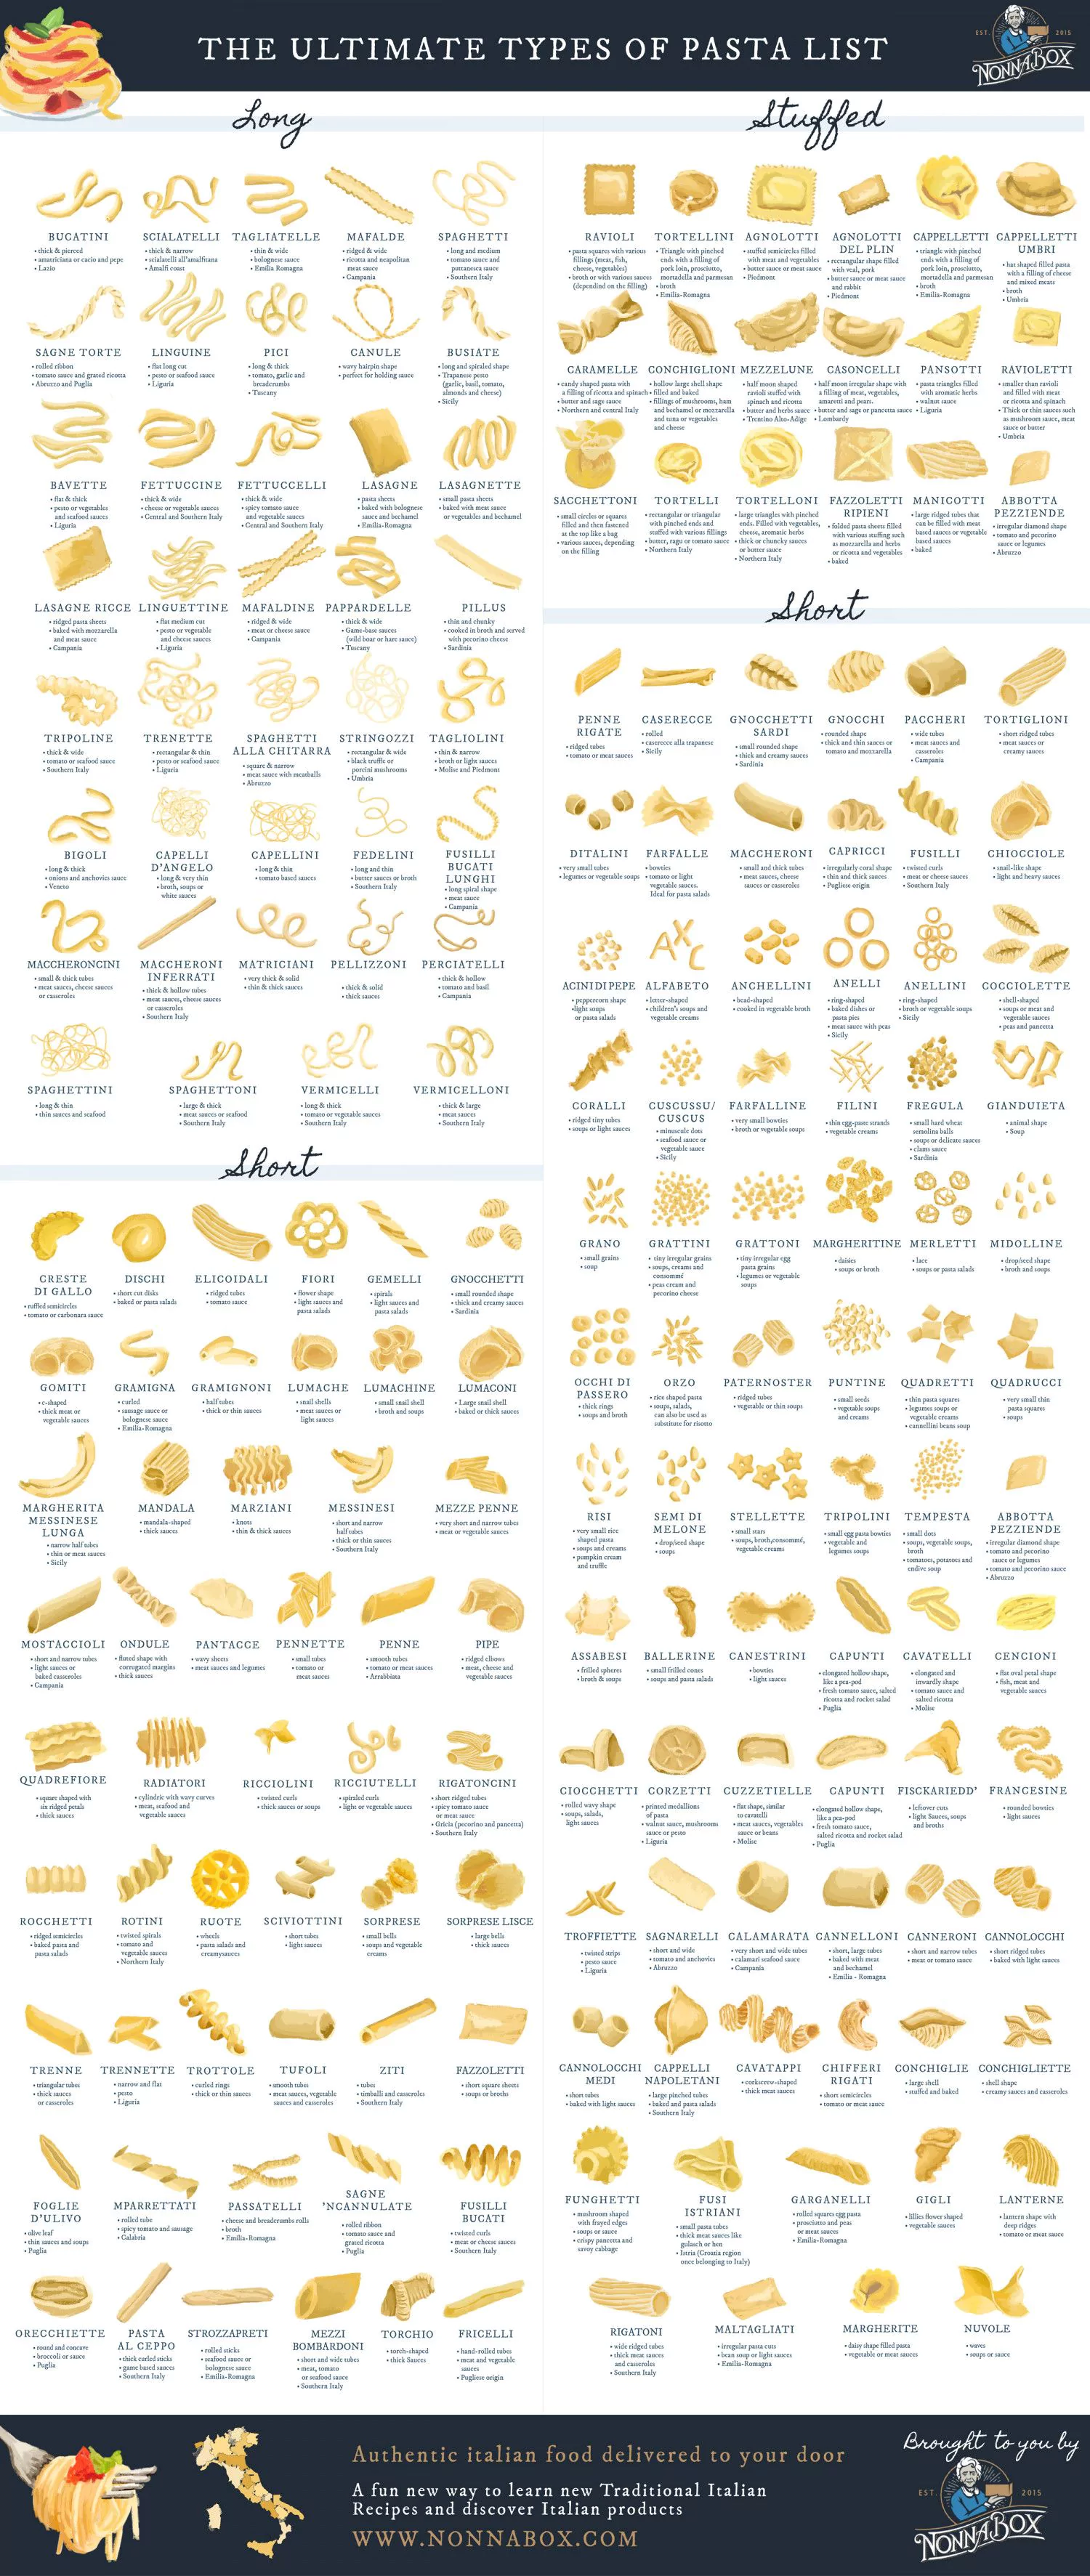 The Ultimate Types of Pasta List